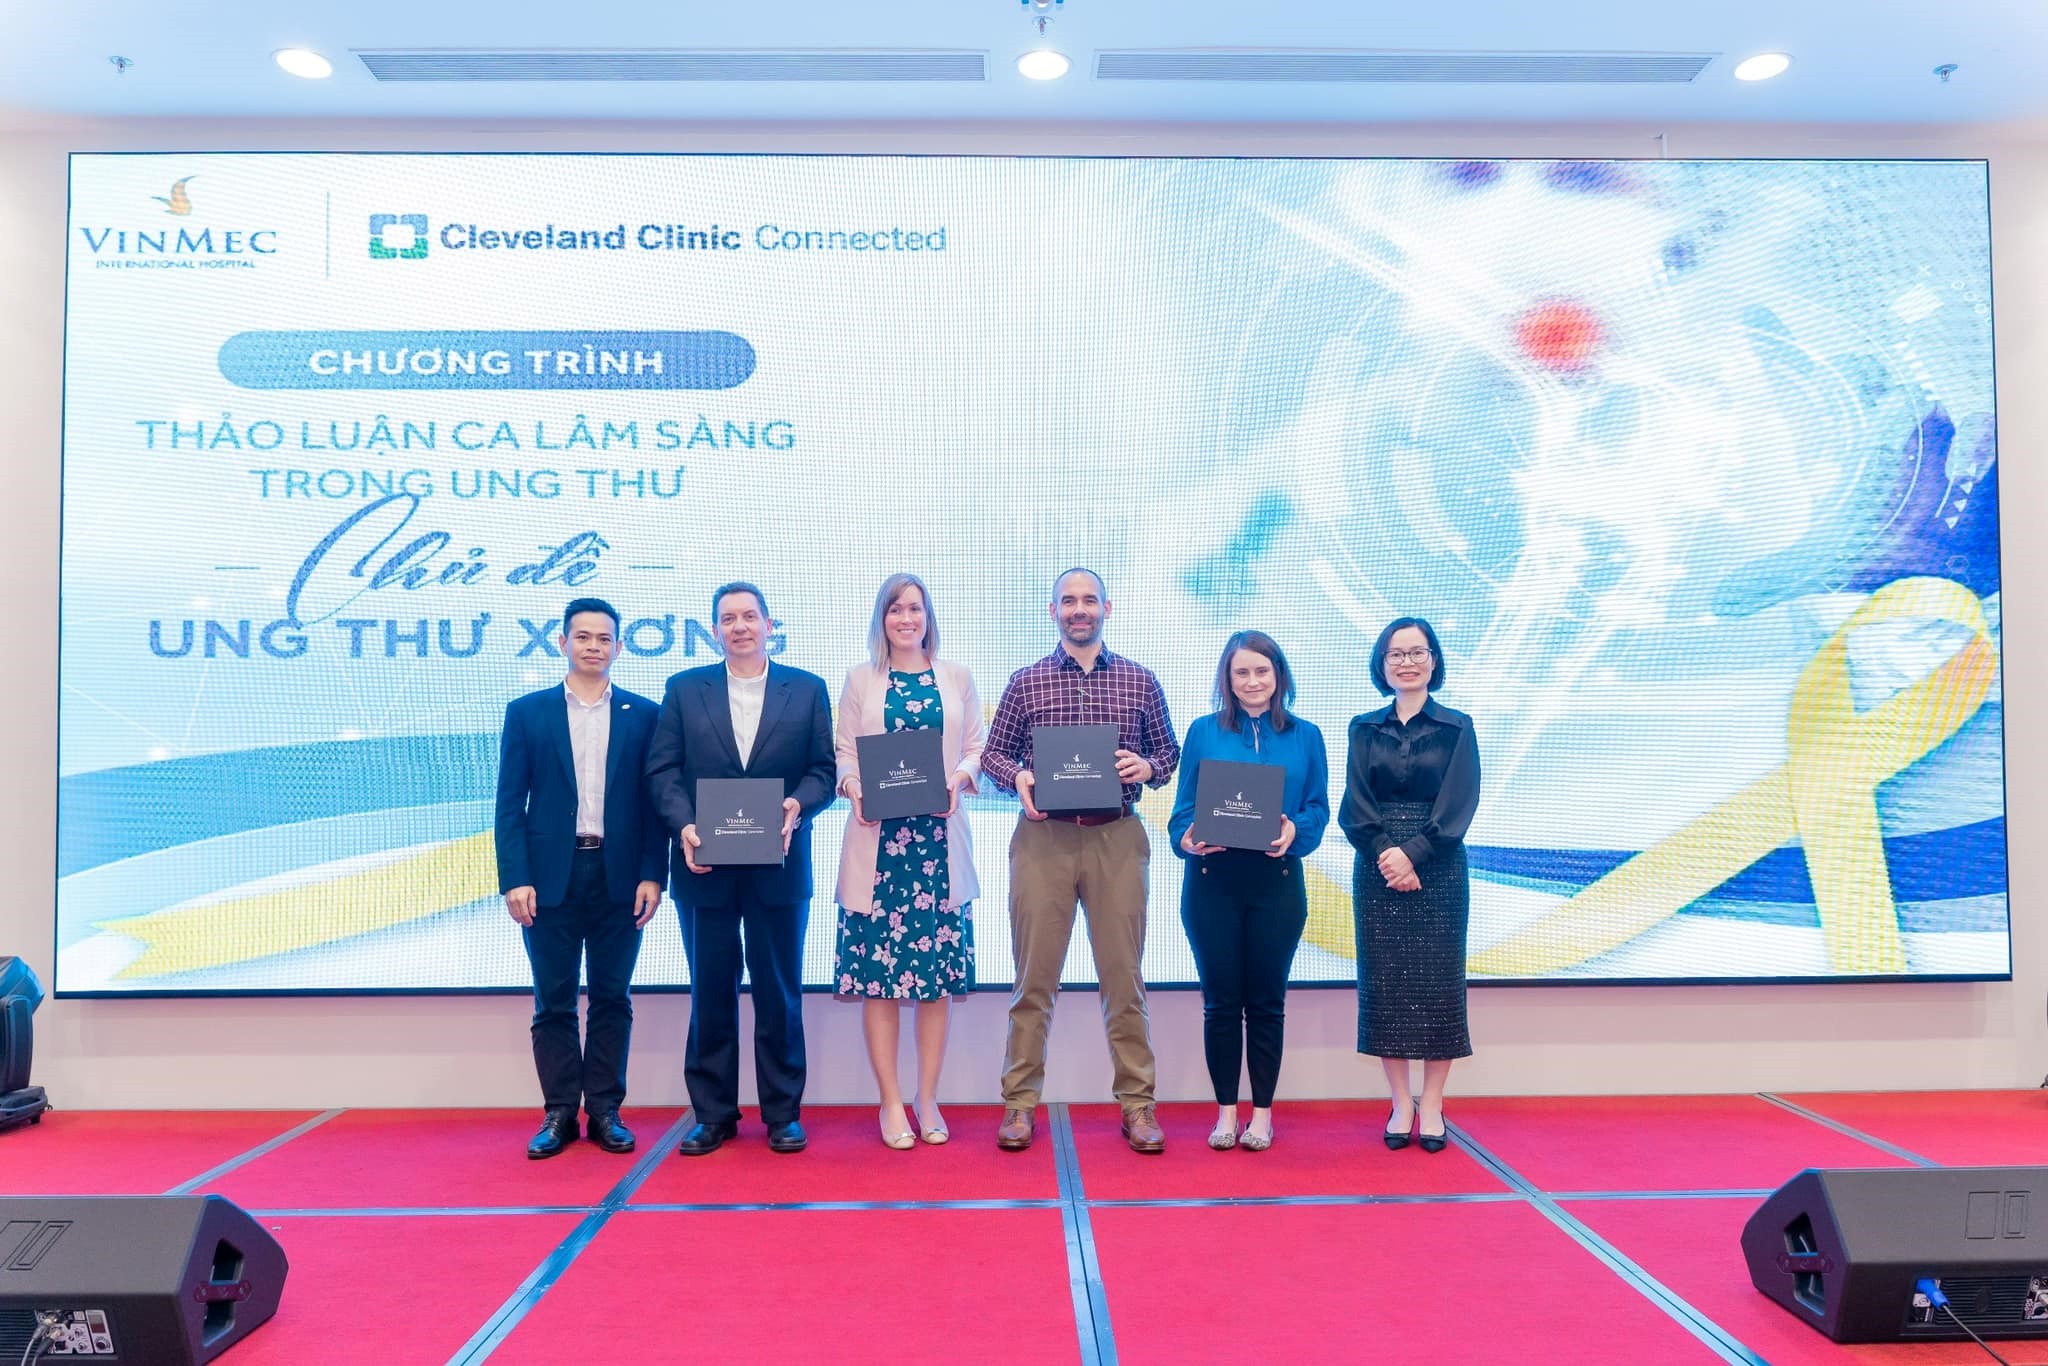 Experts from Cleveland Clinic visited and worked in Vietnam to evaluate the Sarcoma Treatment Program at Vinmec